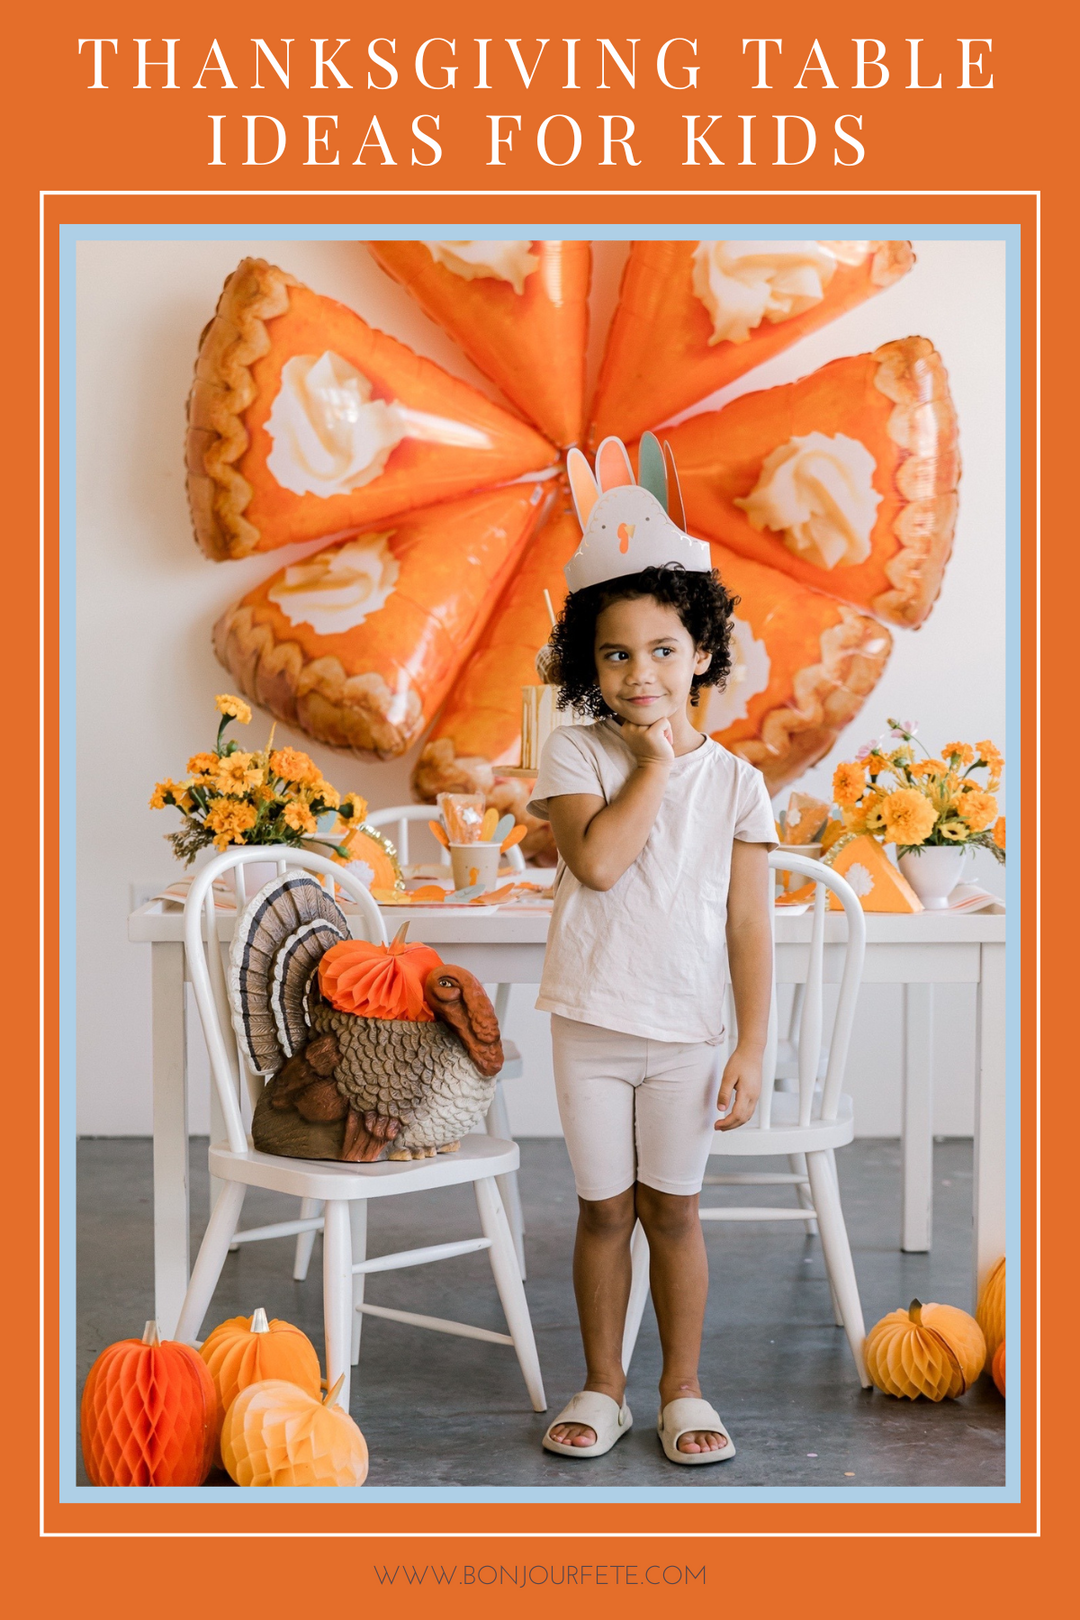 BEST THANKSGIVING TABLE IDEAS FOR KIDS